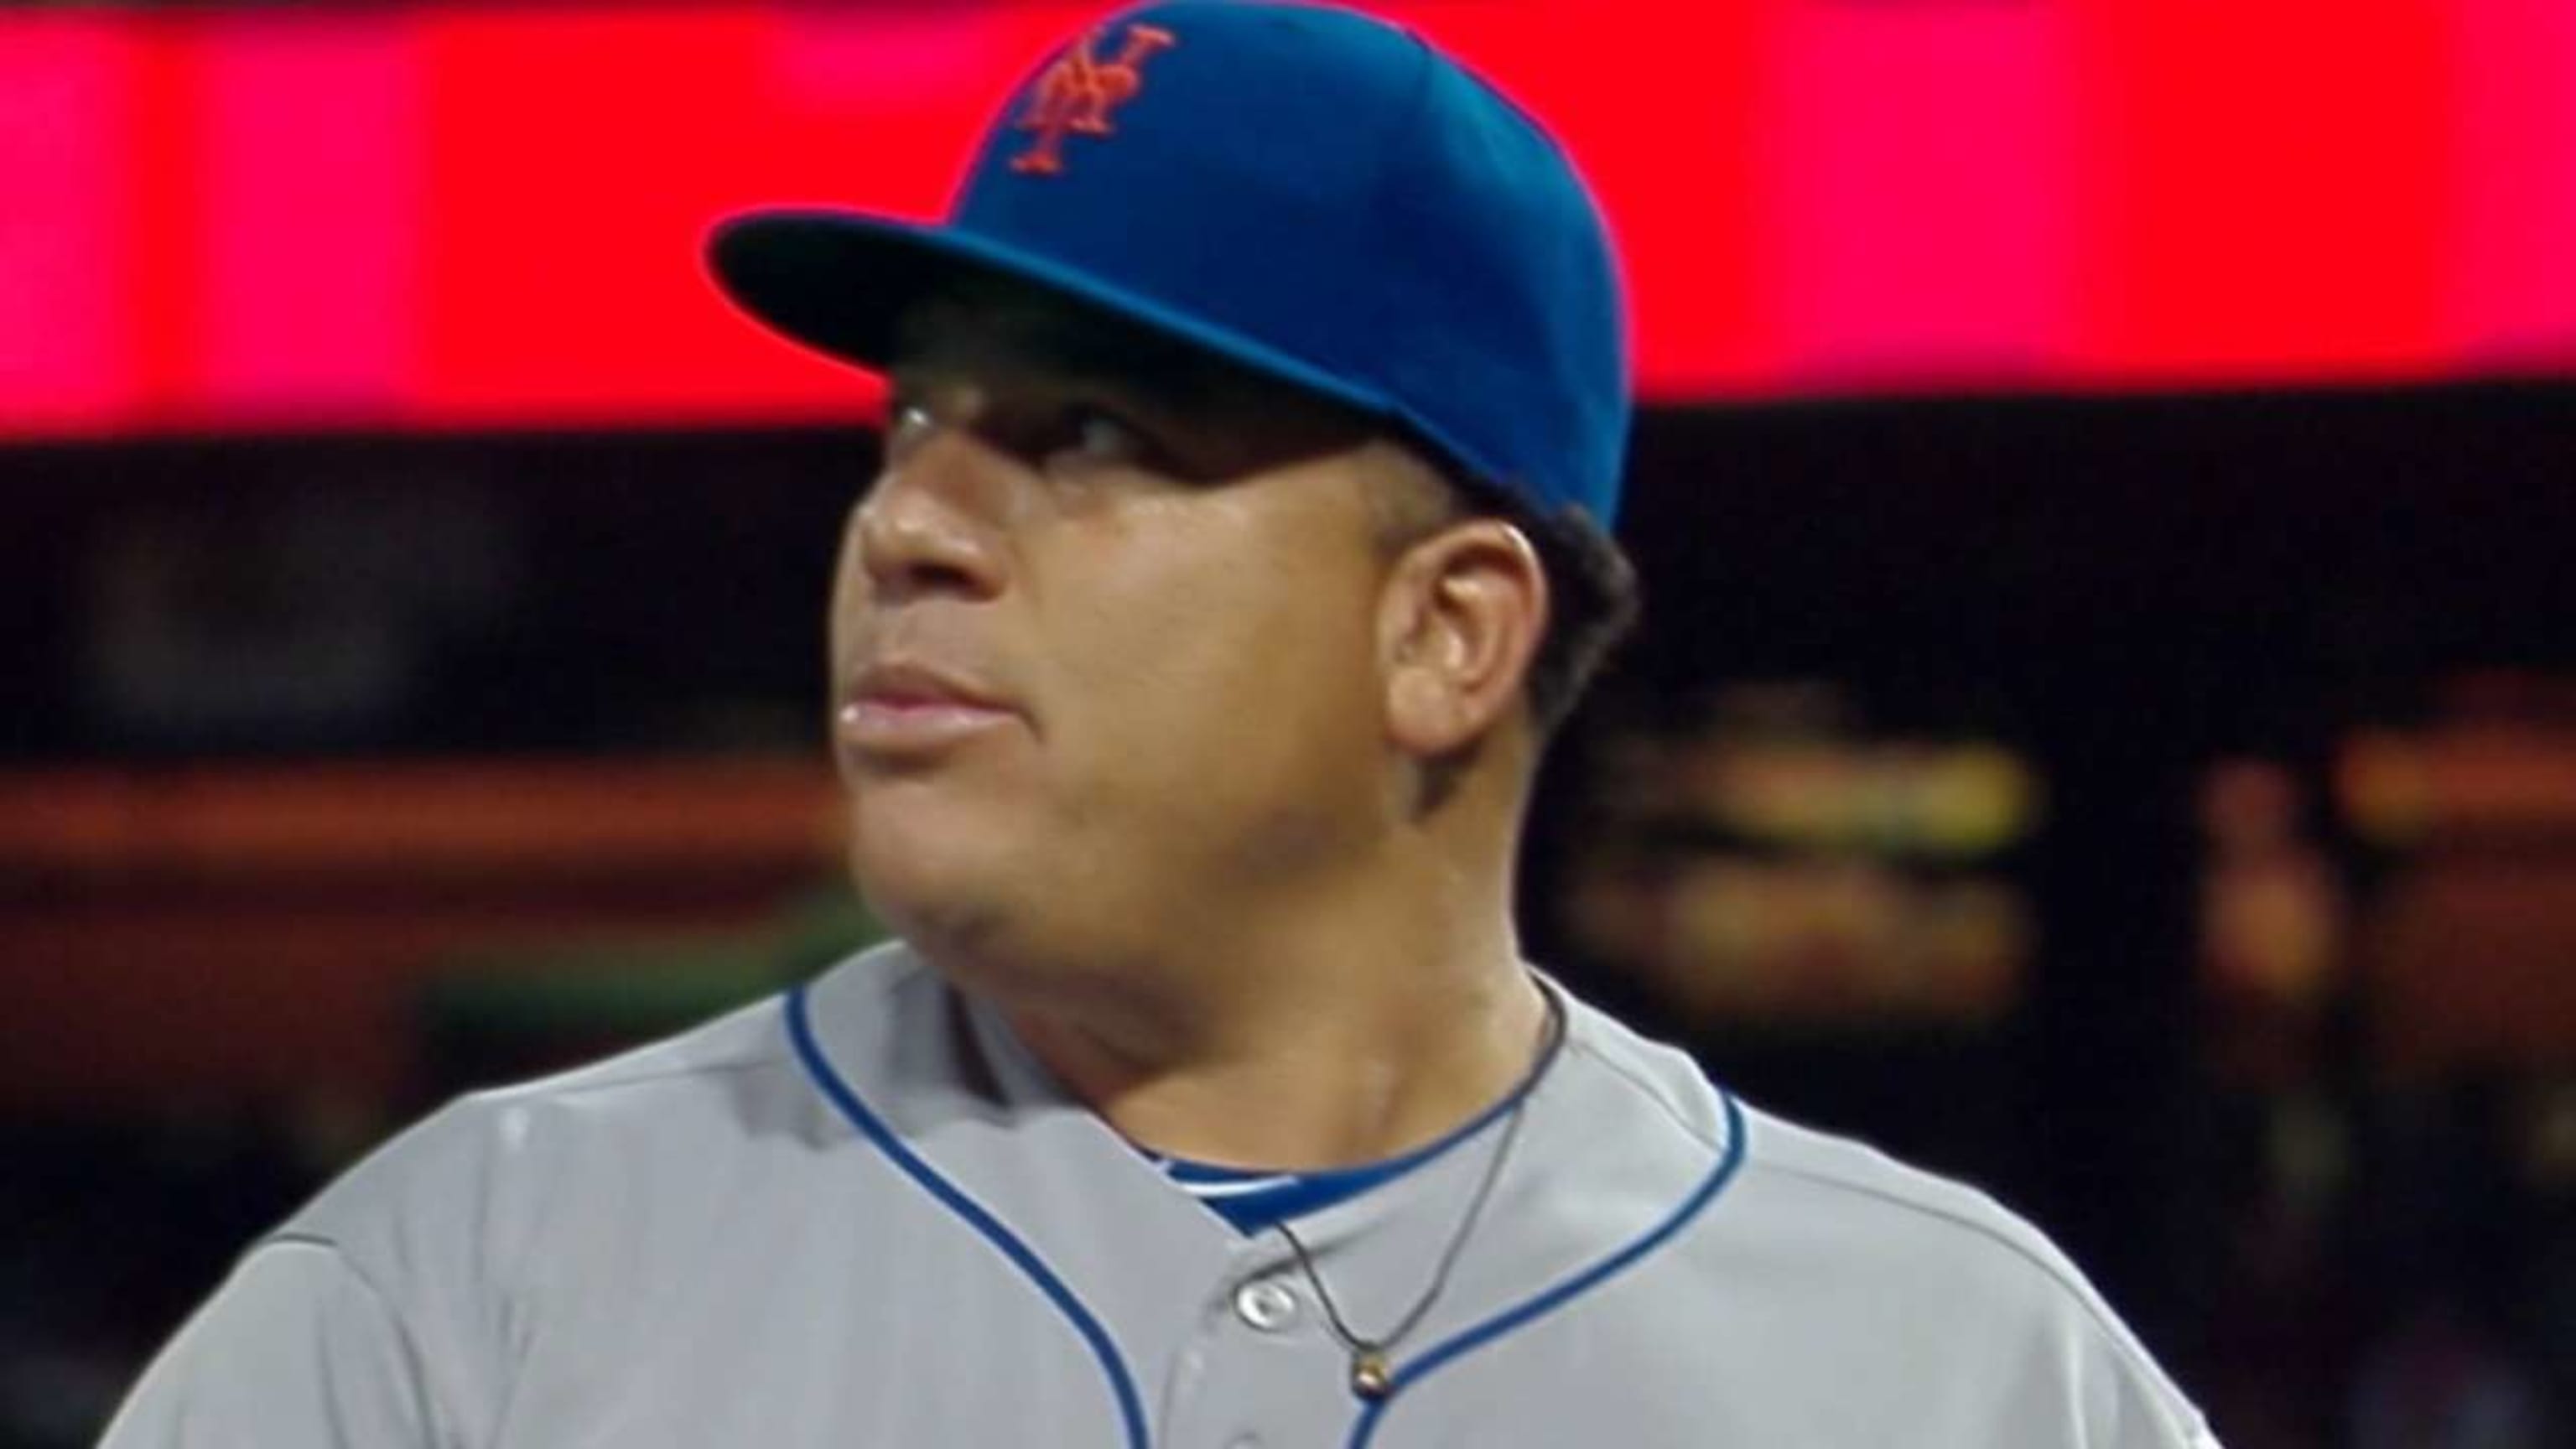 Mets re-sign Bartolo Colon to 1-year, $7.25 million deal - MLB